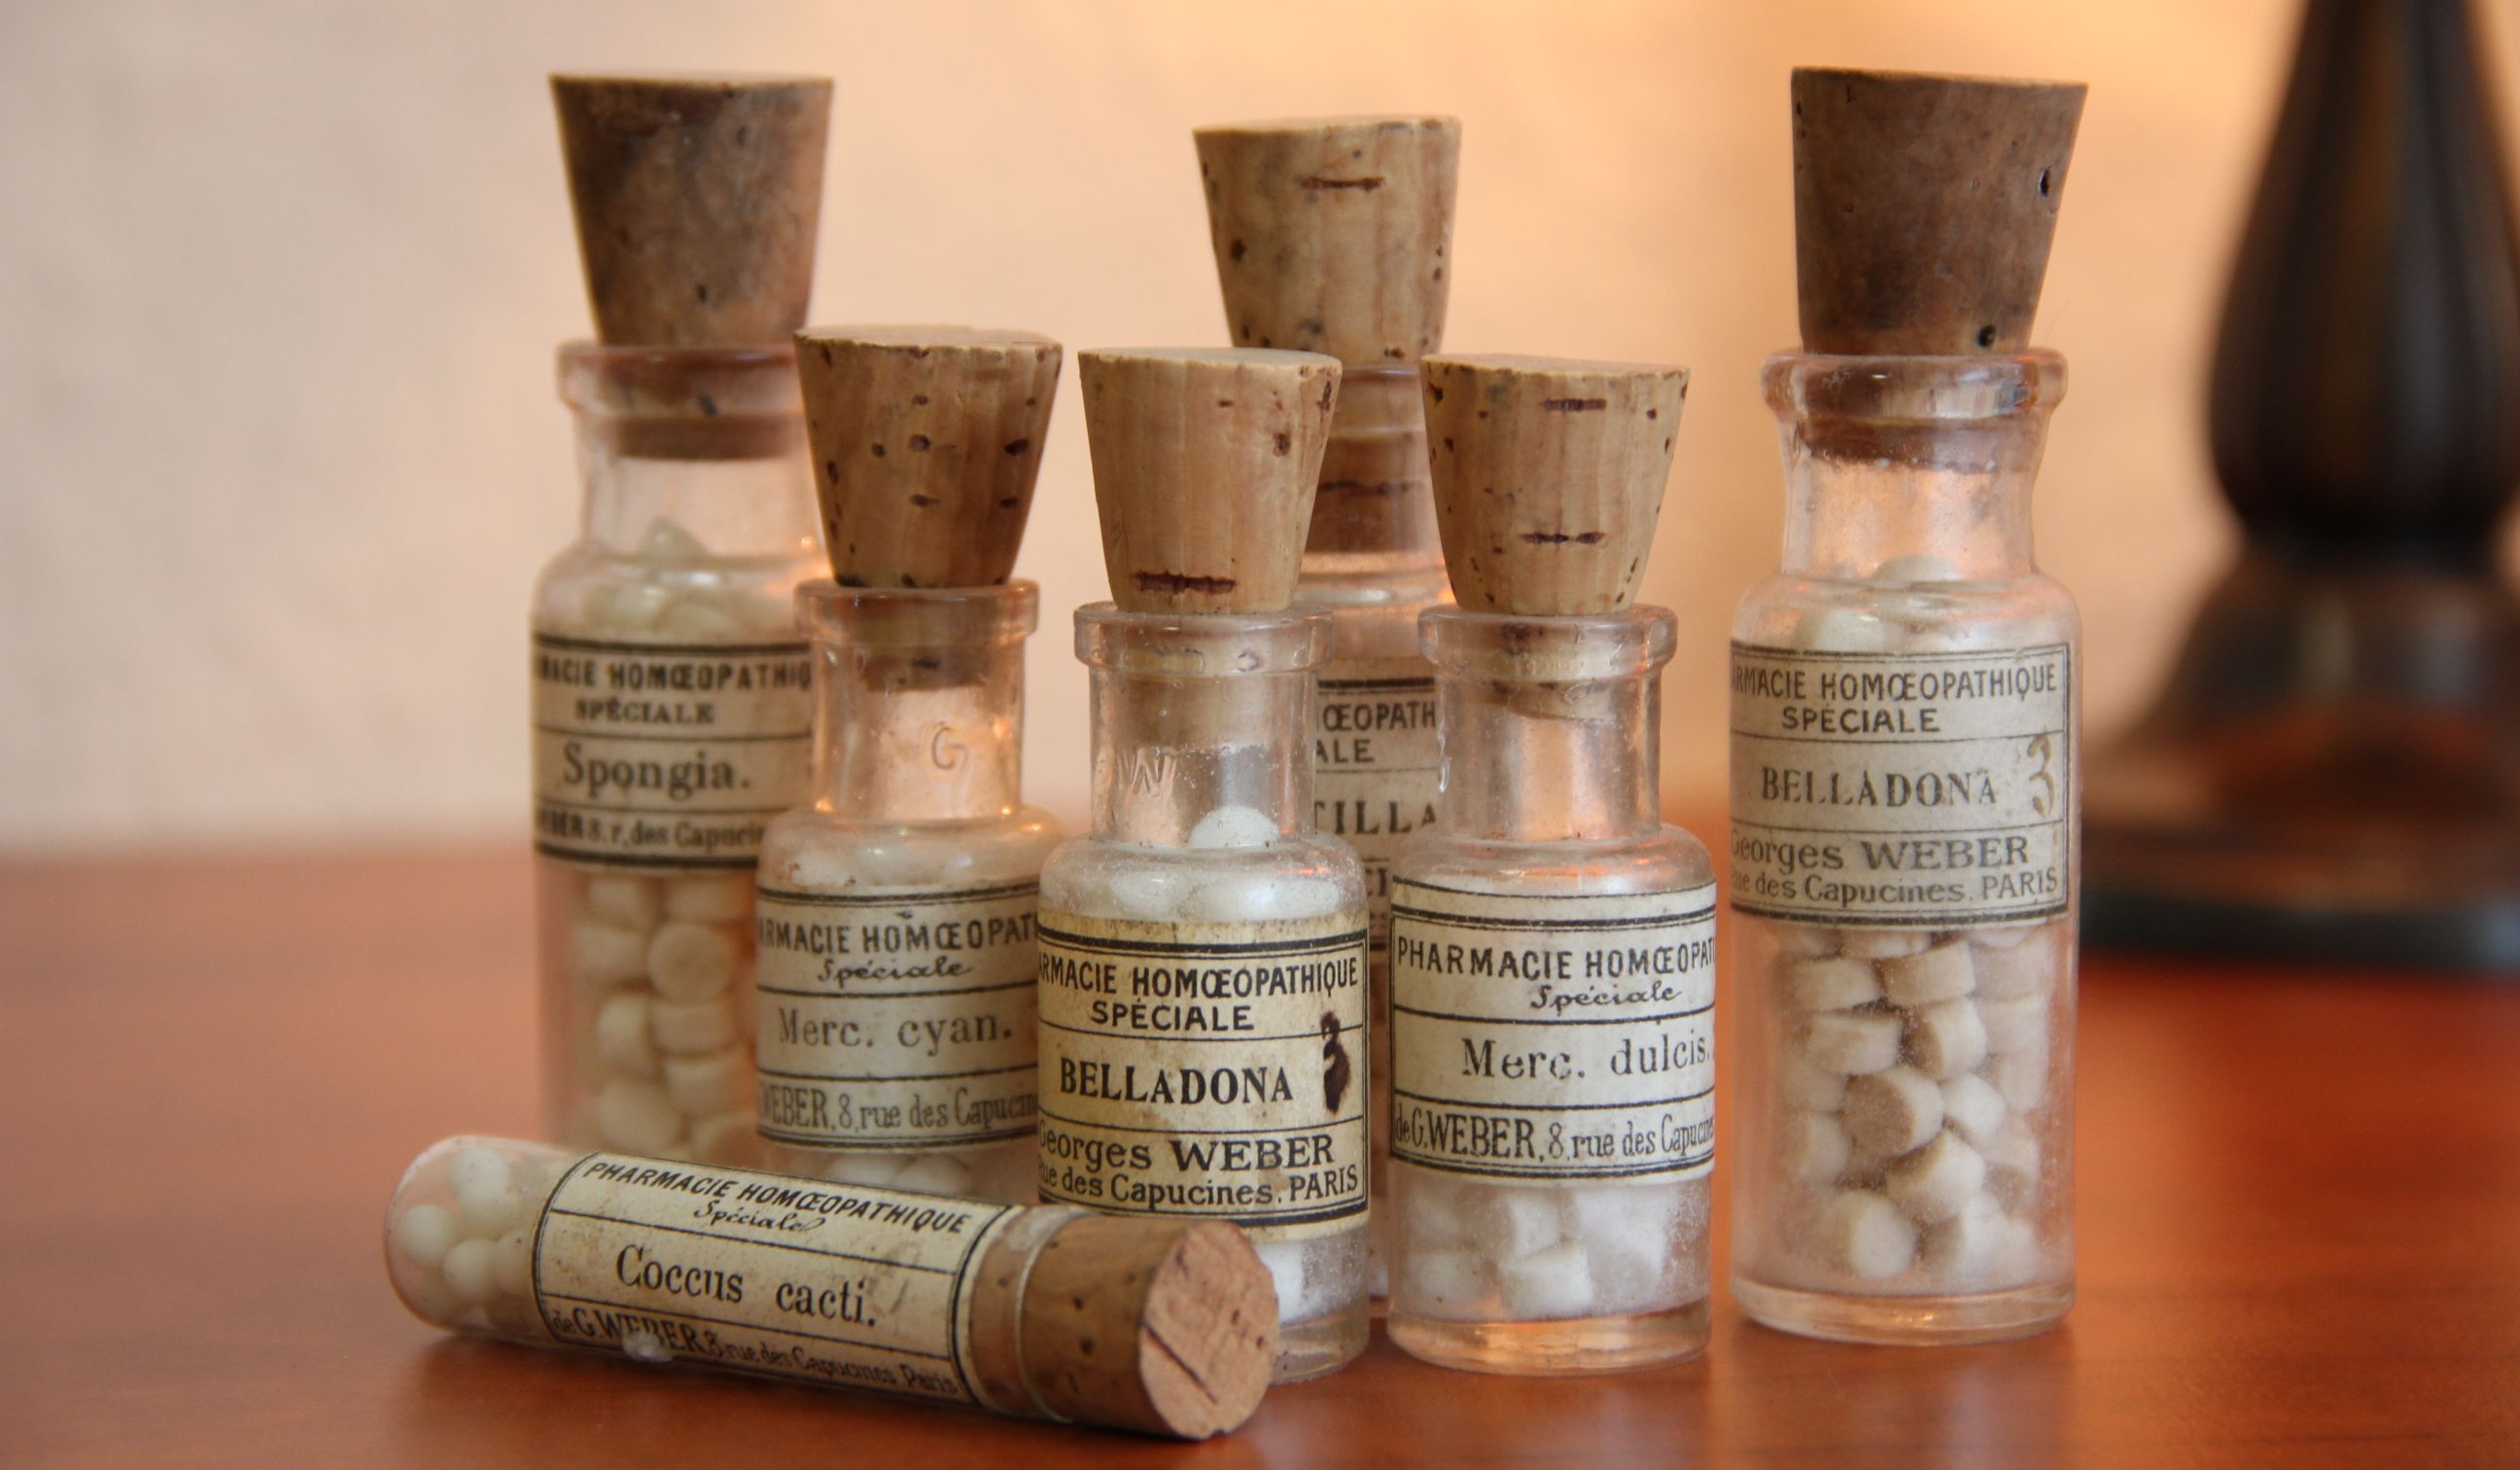 There cannot be two different medicines: scientists continue to struggle with homeopathy